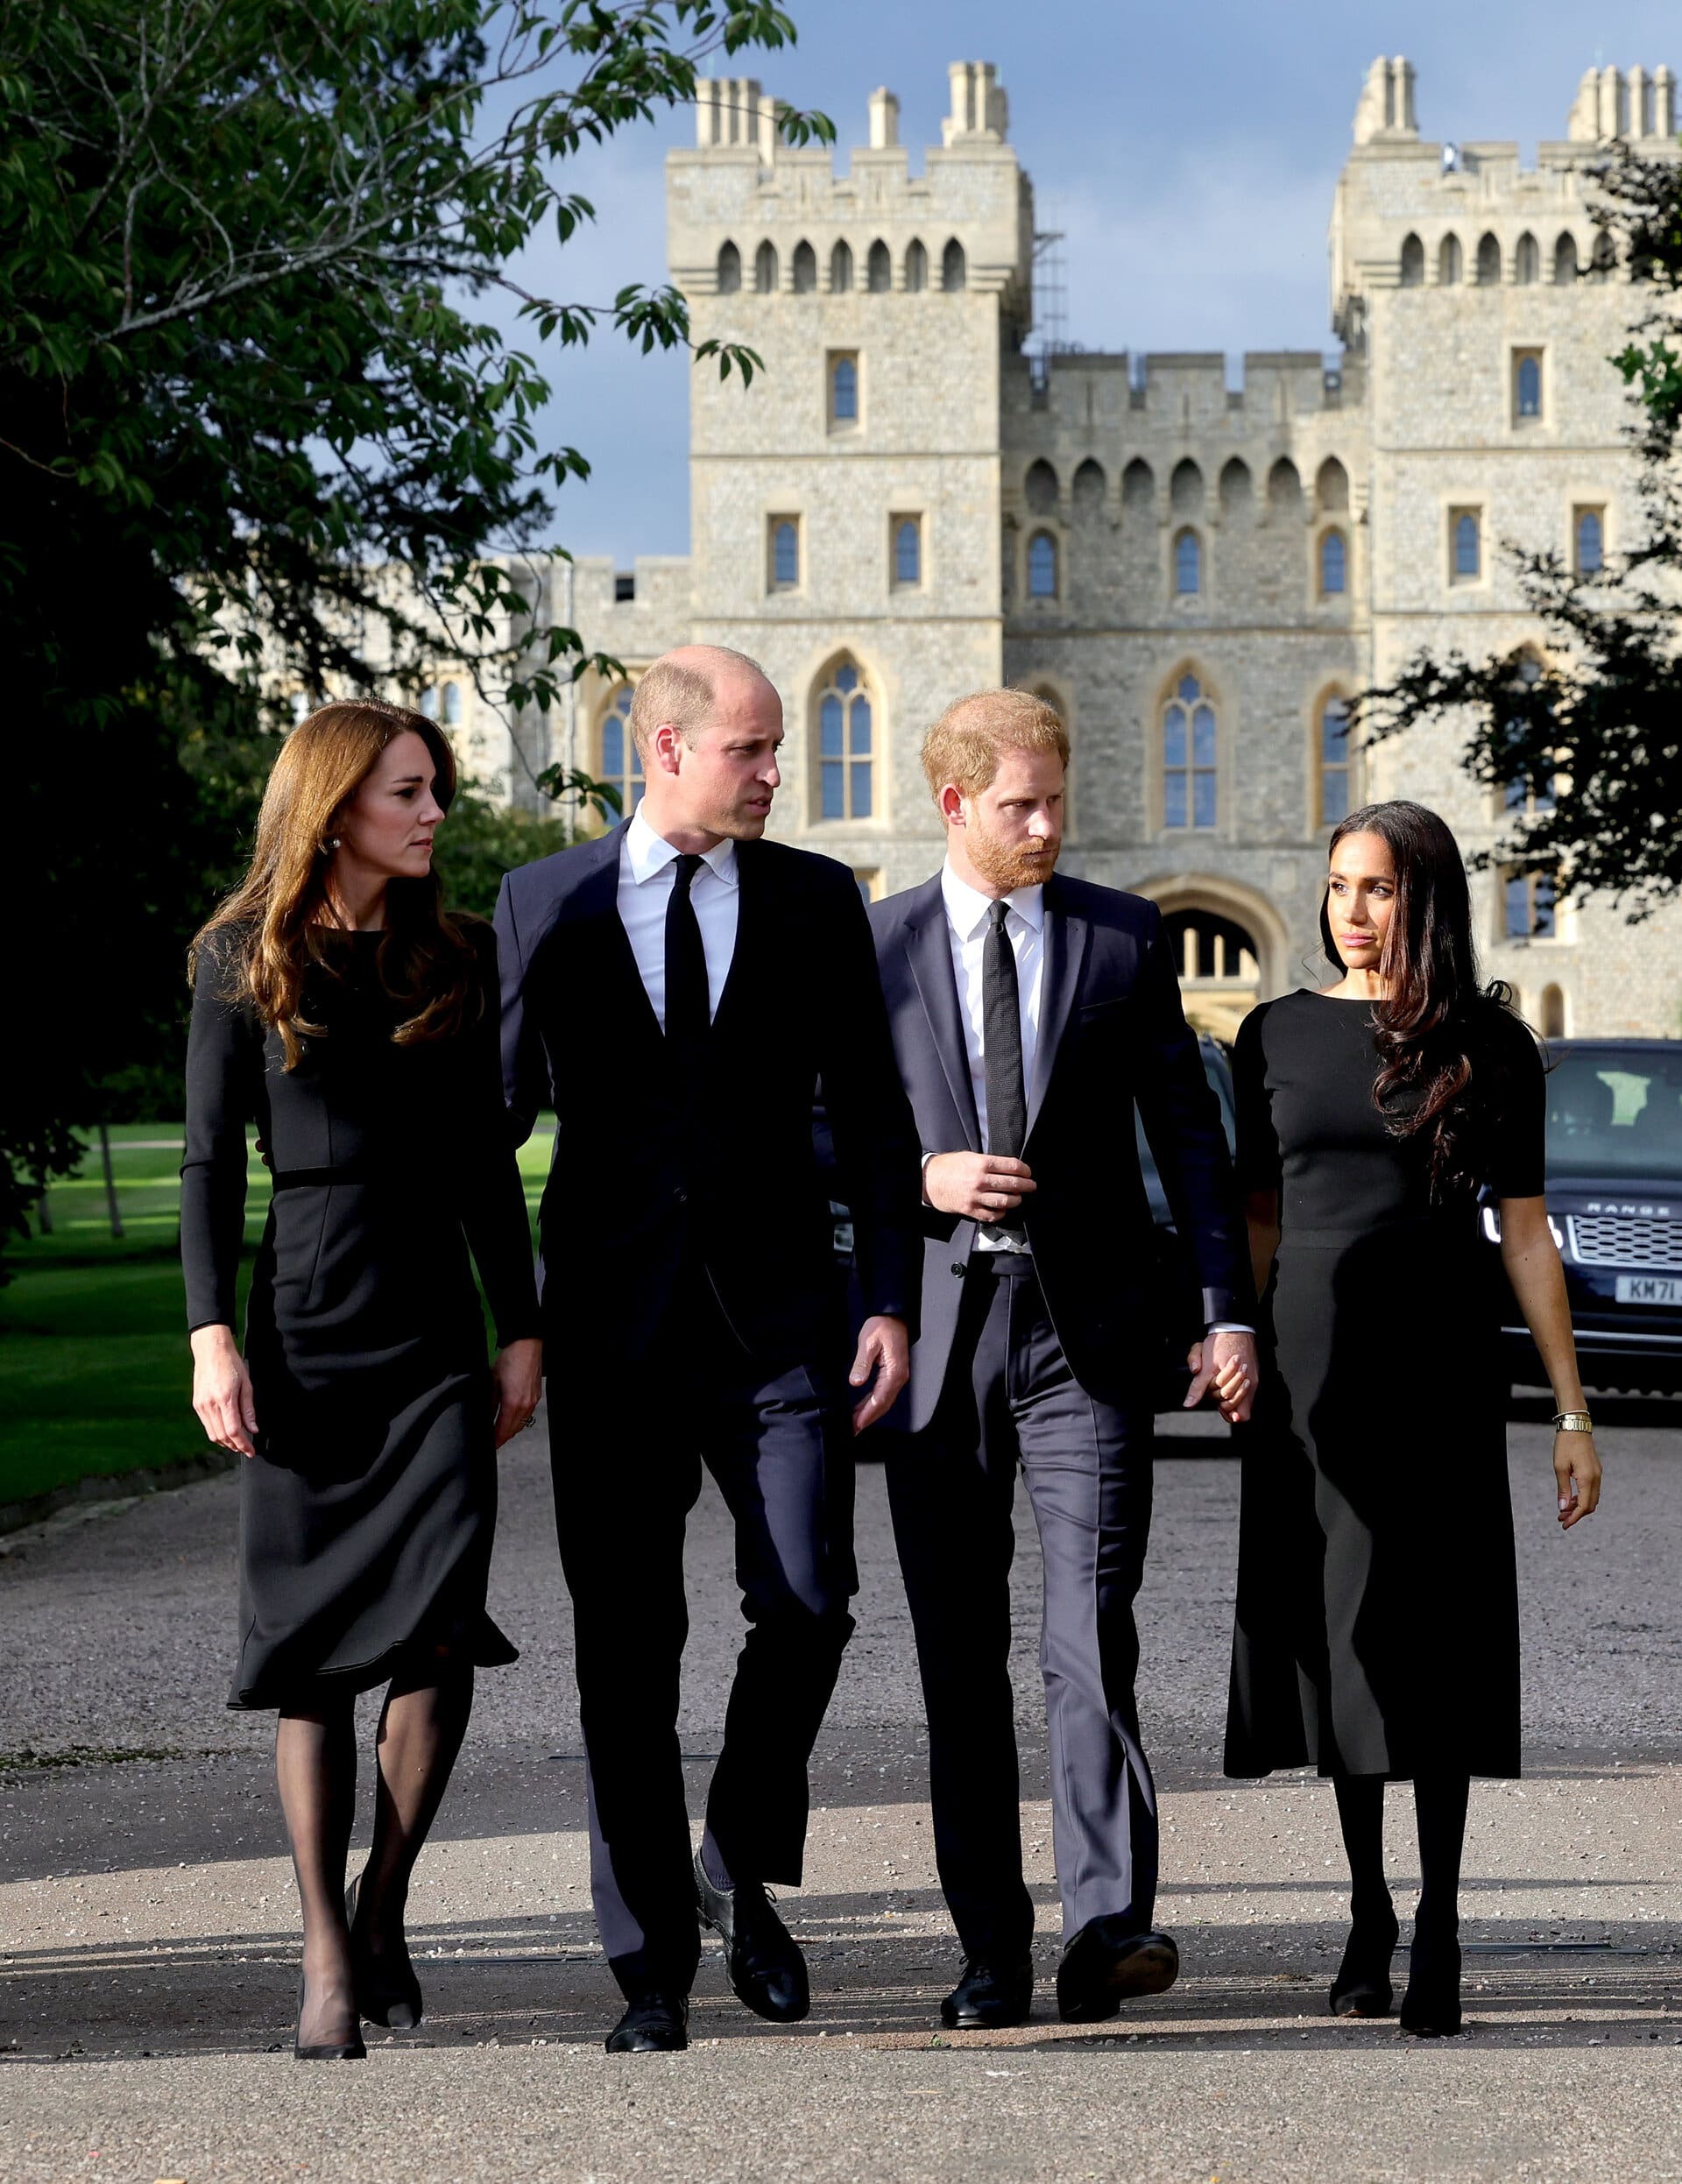 A month after Prince Harry and Meghan Markle’s wedding, the Duke of Cambridge along with his wife had invited the newly-wed over for tea